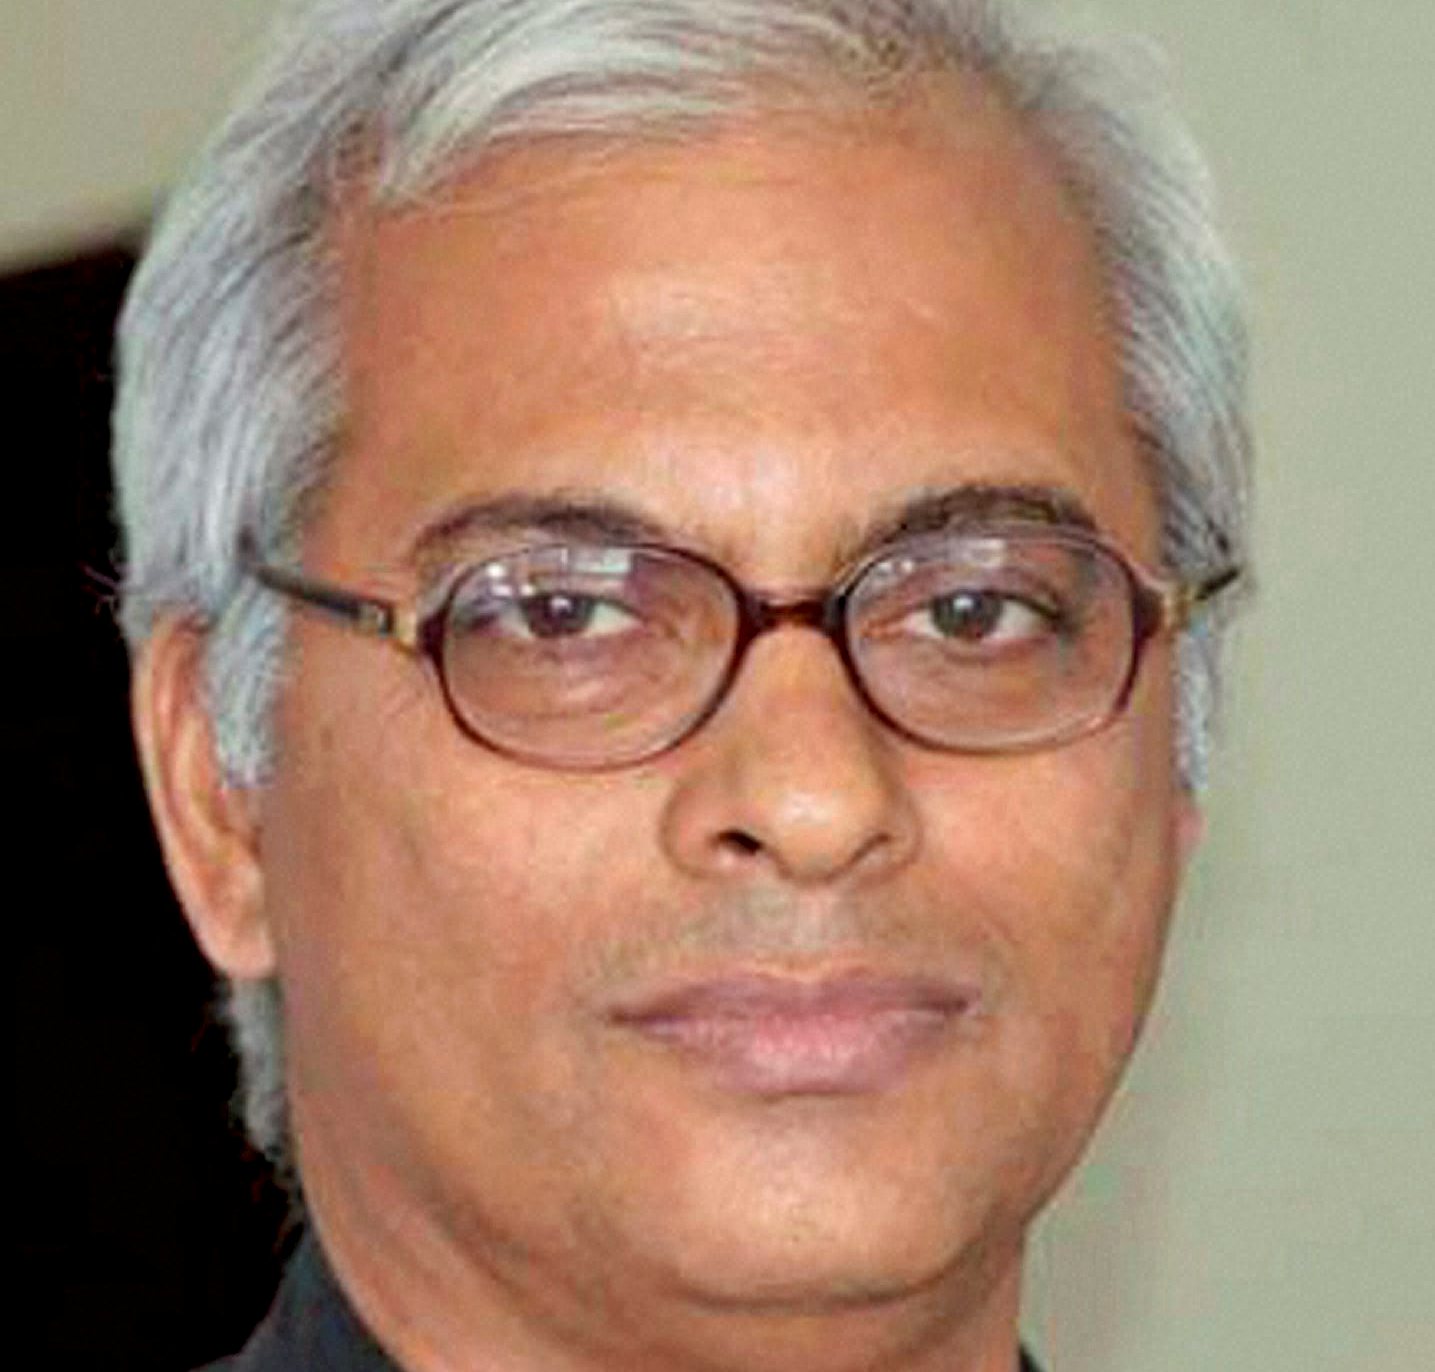 Take steps to secure release of Father Uzhunnalil   